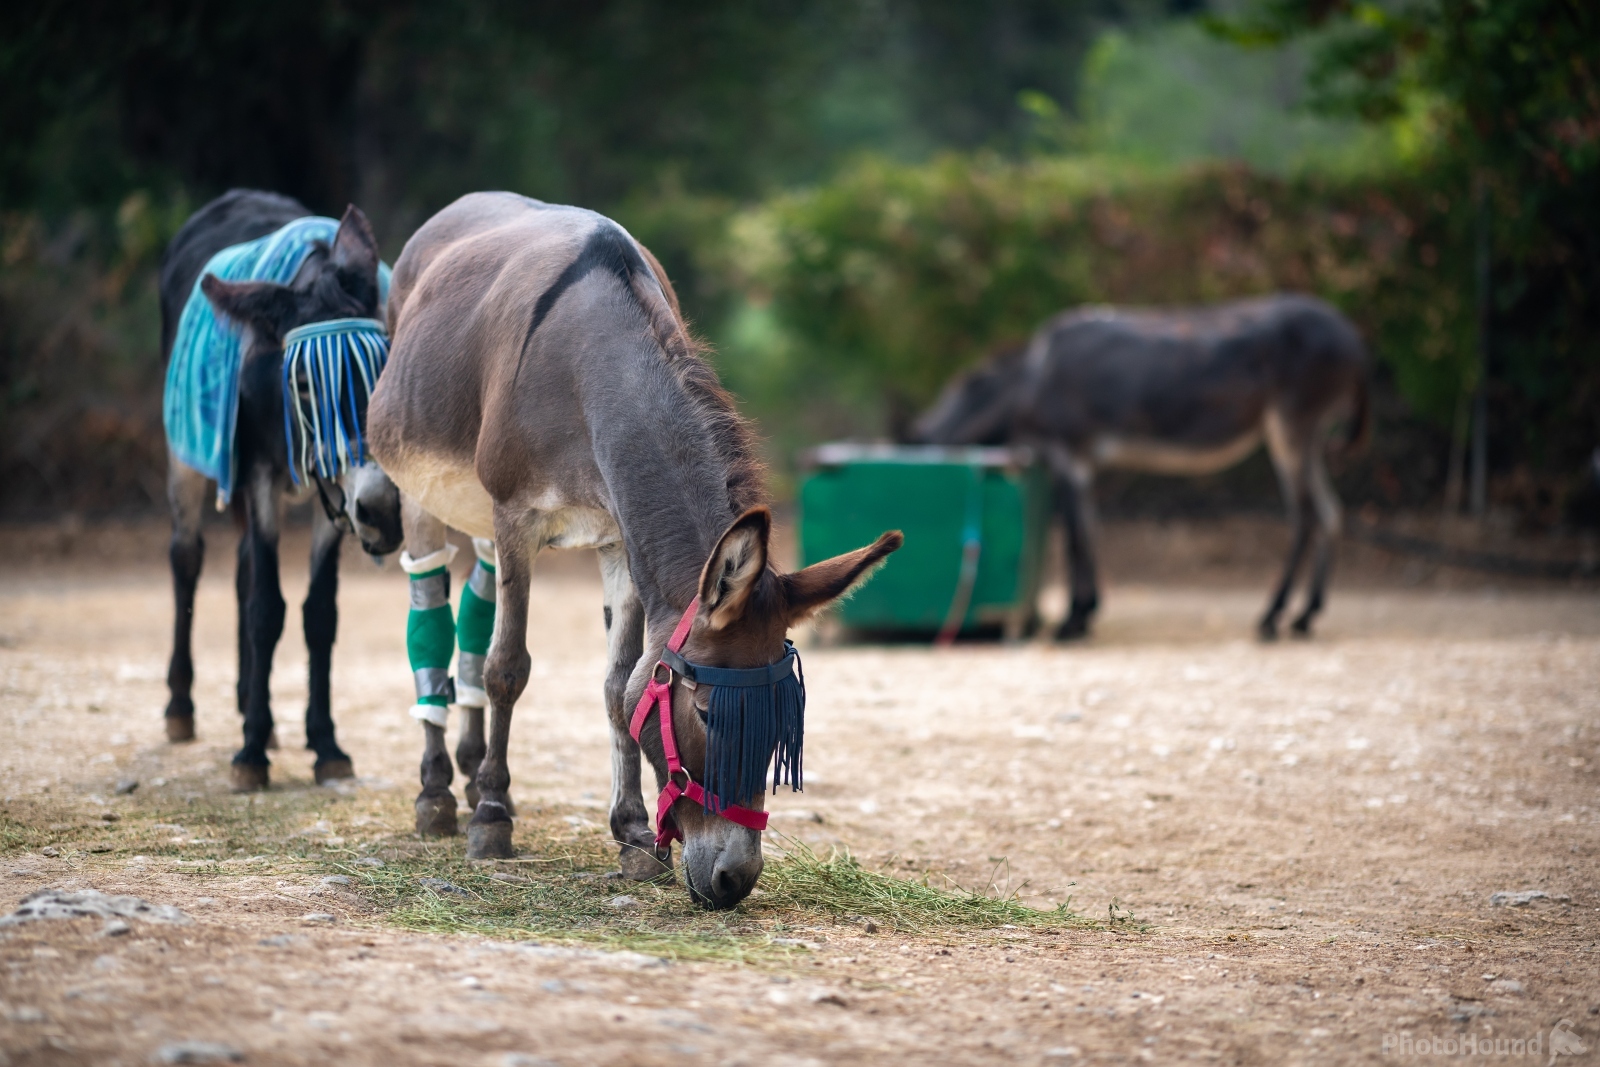 Image of Corfu Donkey Rescue Center by VOJTa Herout